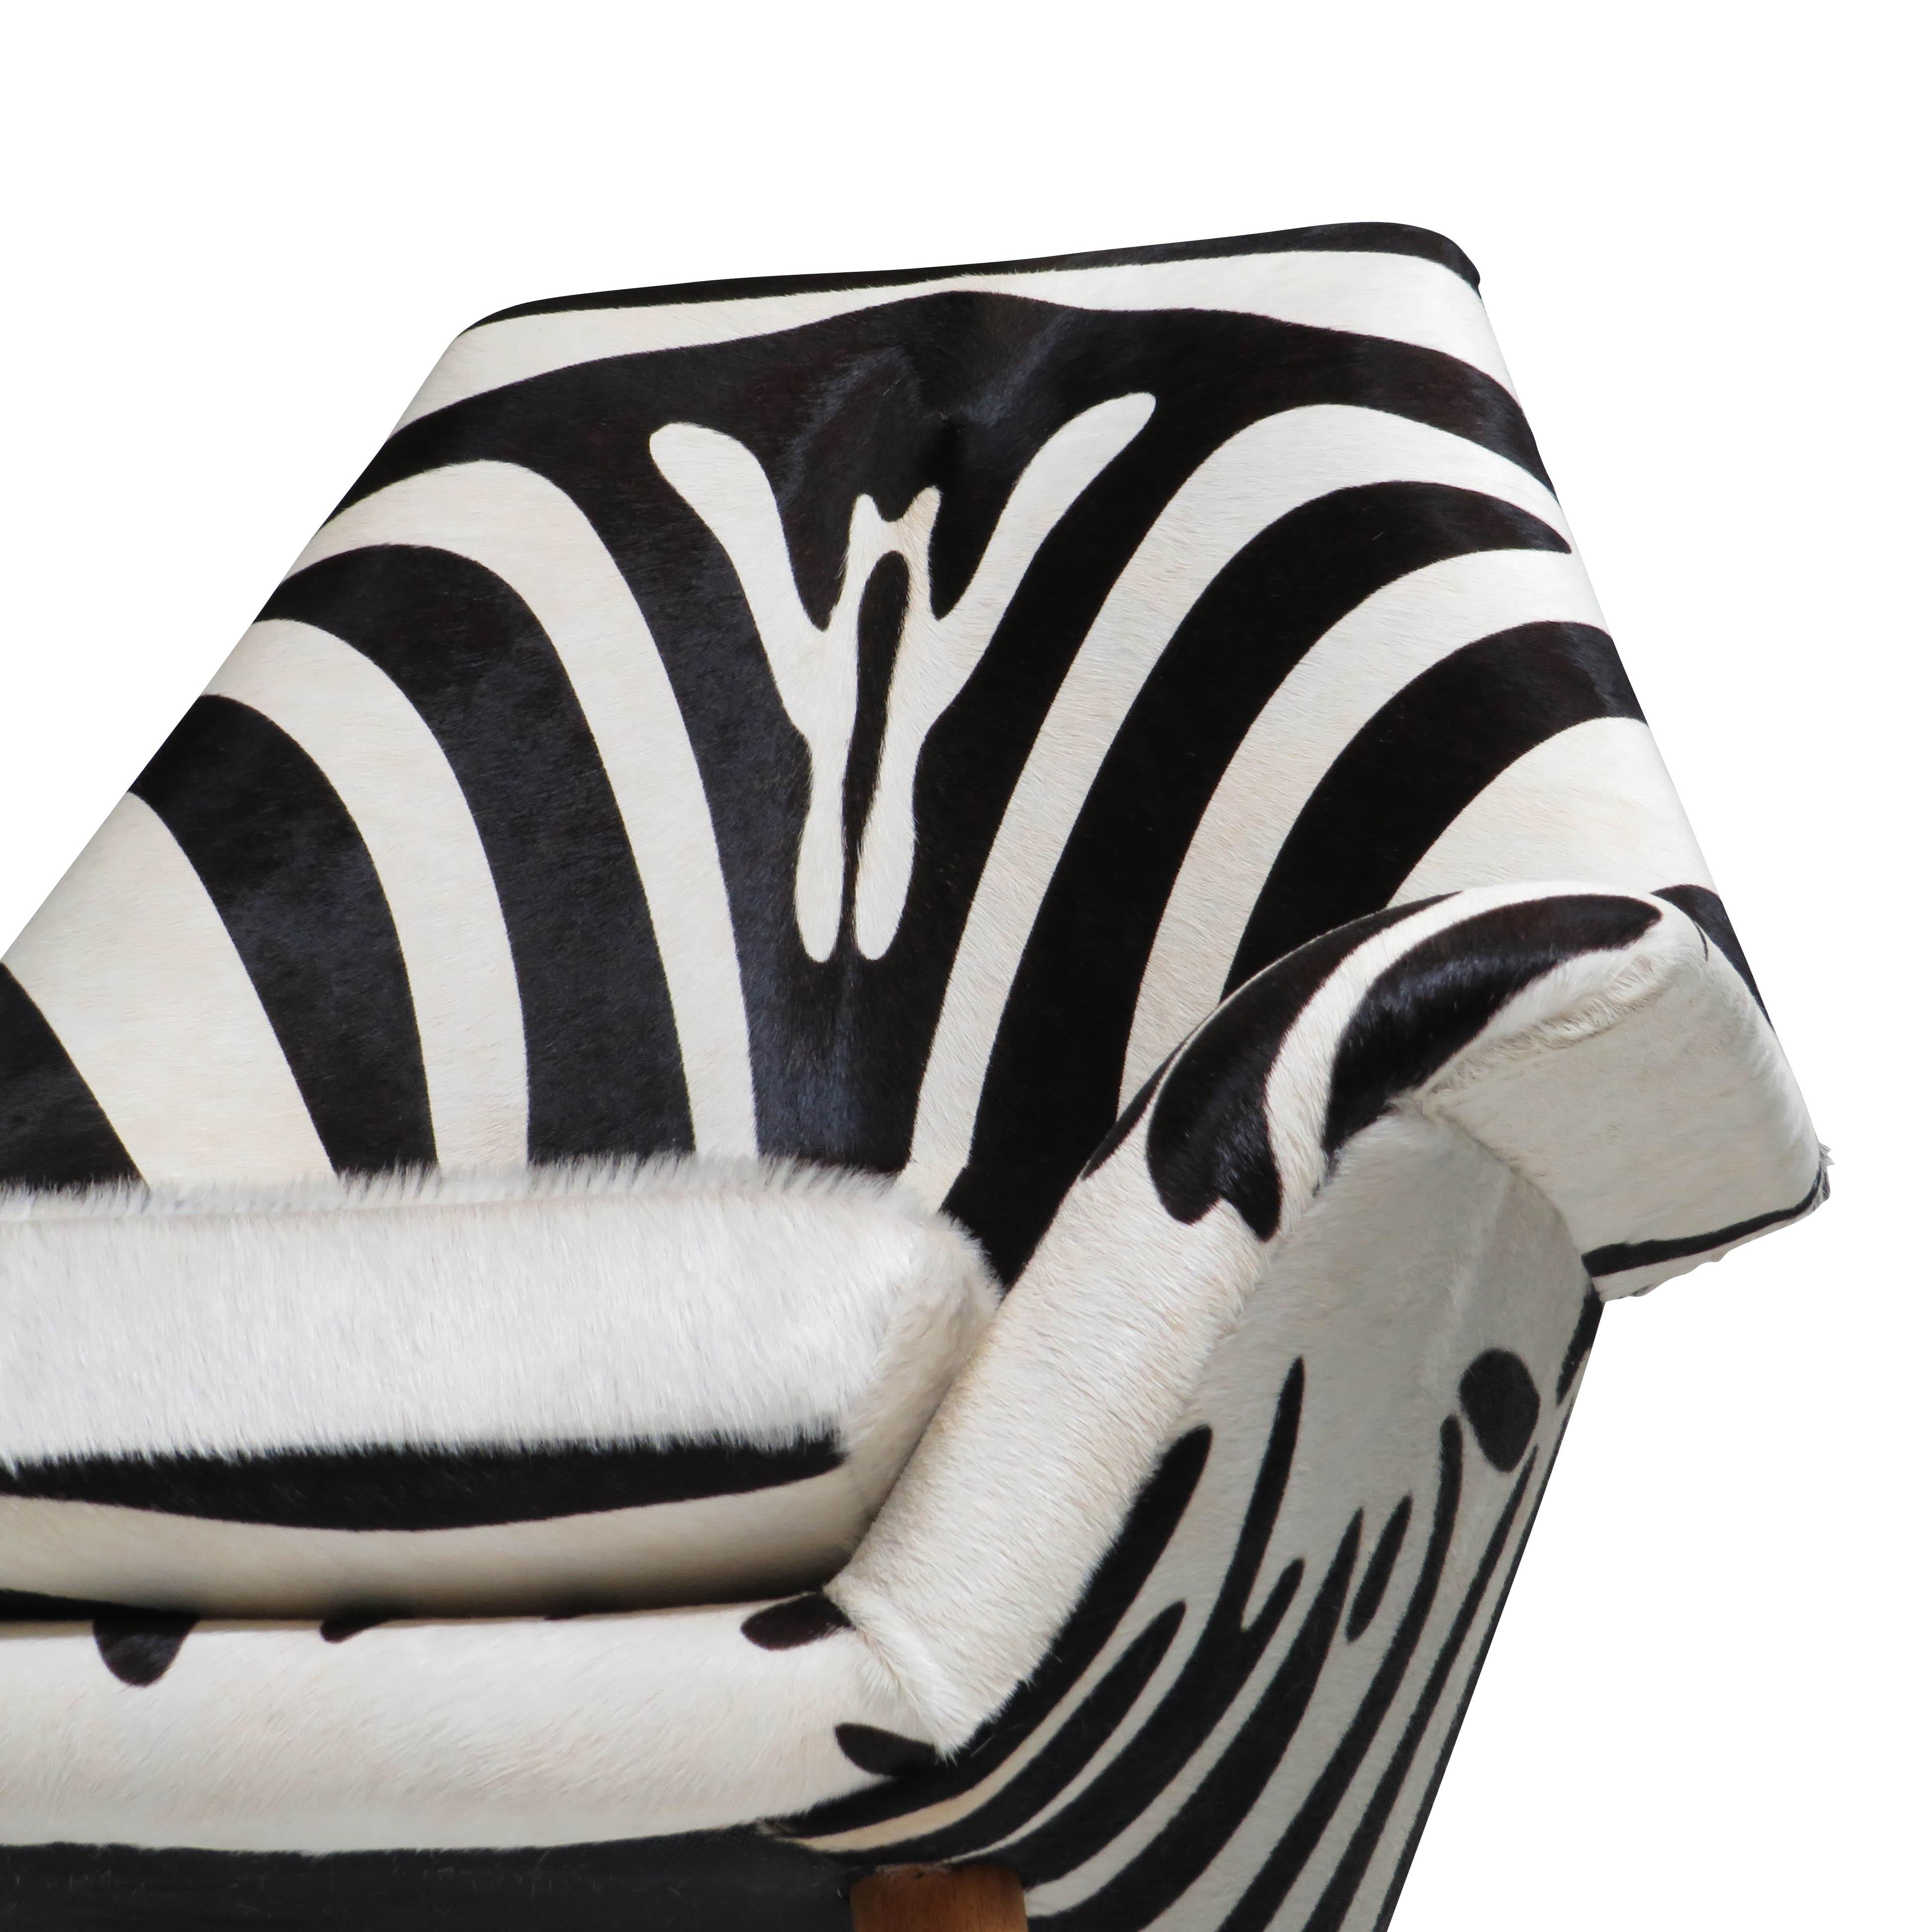 Mid-century Scandinavian high-back lounge chair designed by Torbjorn Afdal for Brusko, Bjarne Hansen Circa 1955, Norway. Crafted of a solid wood frame with flareds arms and newly upholstered in zebra stamped hair-on cow hide leather. Raised on solid